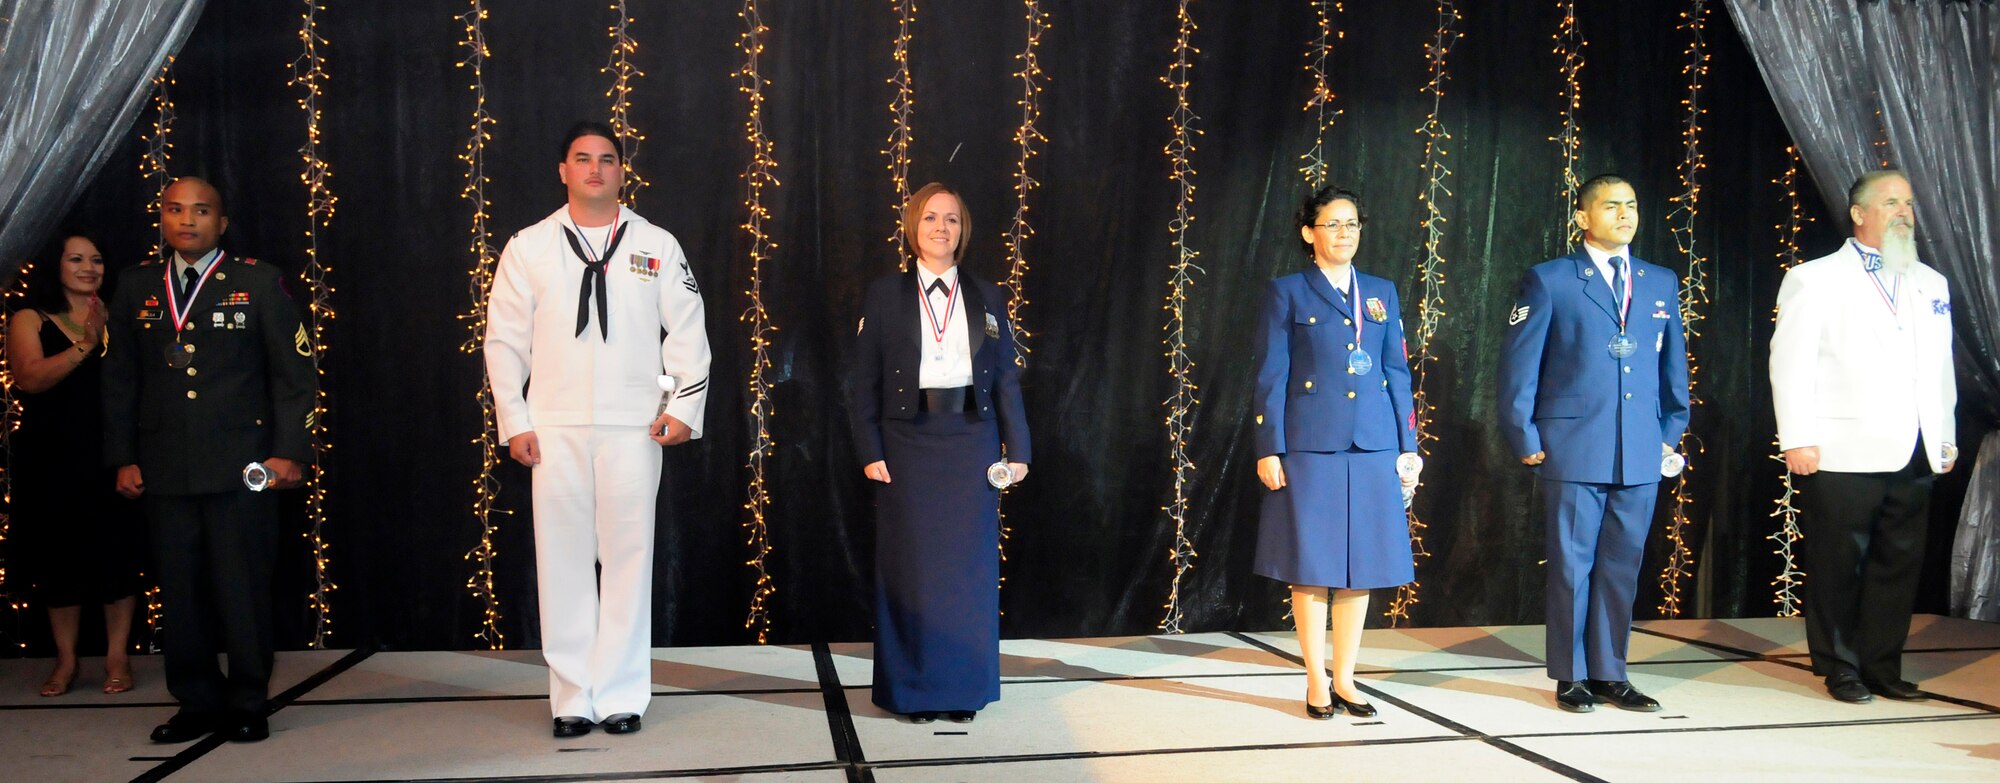 ANDERSEN AIR FORCE BASE, Guam - From left to right, Staff Sgt. Rodel Galila, Aircrew Petty Officer 2nd Class Carlos Carpio, Staff Sgt. Jamie Brewer, Marine Science Technician 1st Class Jennifer Thomas, Staff Sgt. Shuan Morrison. and Rich Ortloff are recognized as USO Servicemembers of the Year Award during the USO Gala at the Hyatt Hotel May 16.(U.S. photo by Airman 1st Class Courtney Witt)

